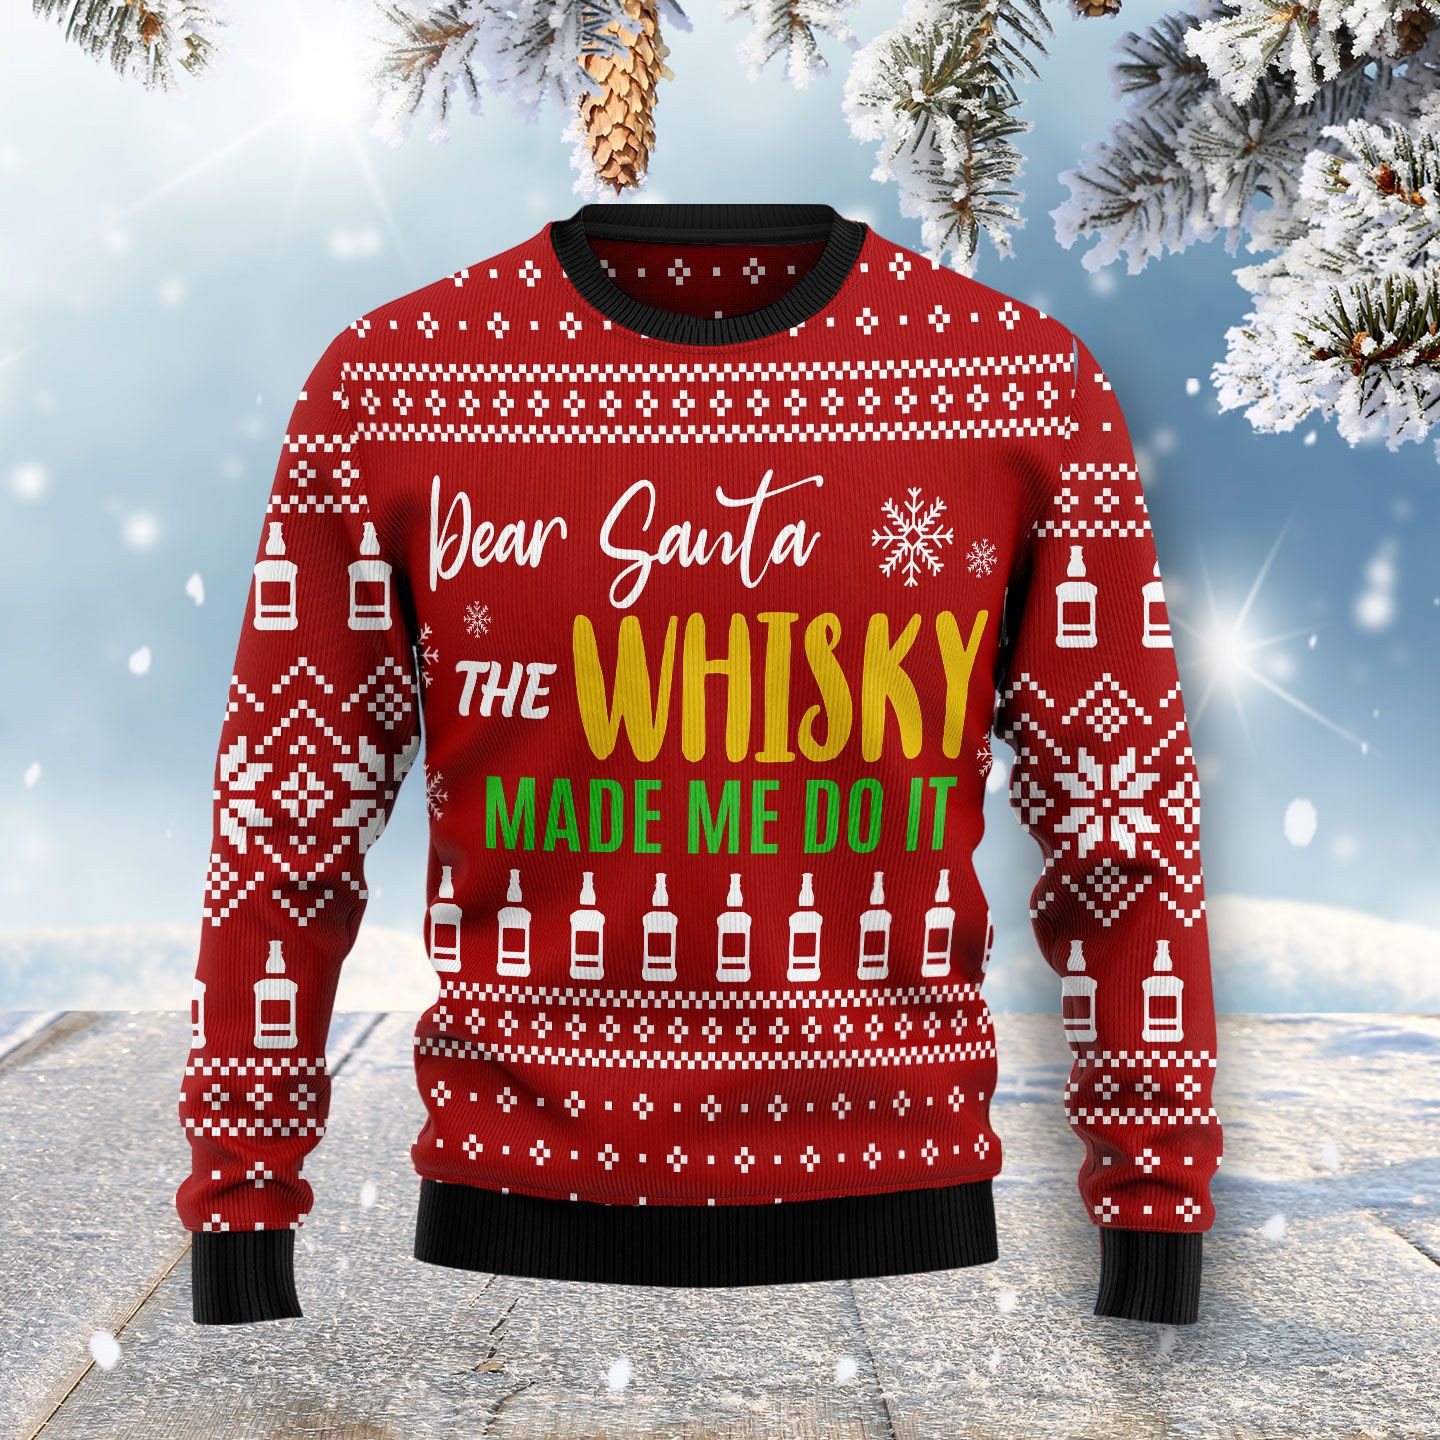 Dear Santa The Whisky Made Me Do It Ugly Christmas Sweater Ugly Sweater For Men Women